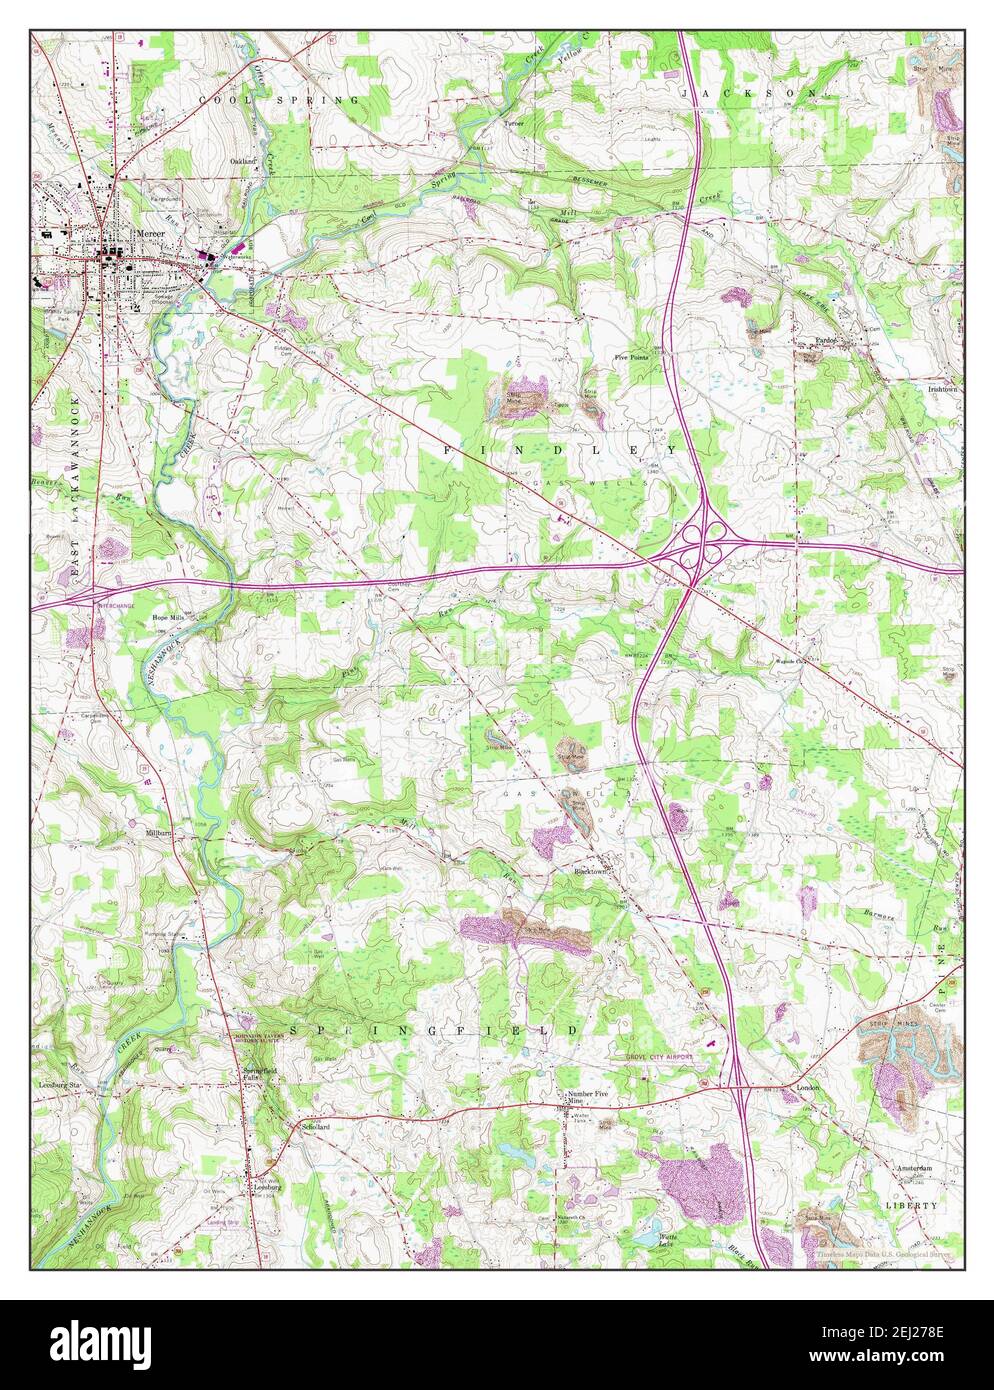 Mercer, Pennsylvania, map 1961, 1:24000, United States of America by Timeless Maps, data U.S. Geological Survey Stock Photo